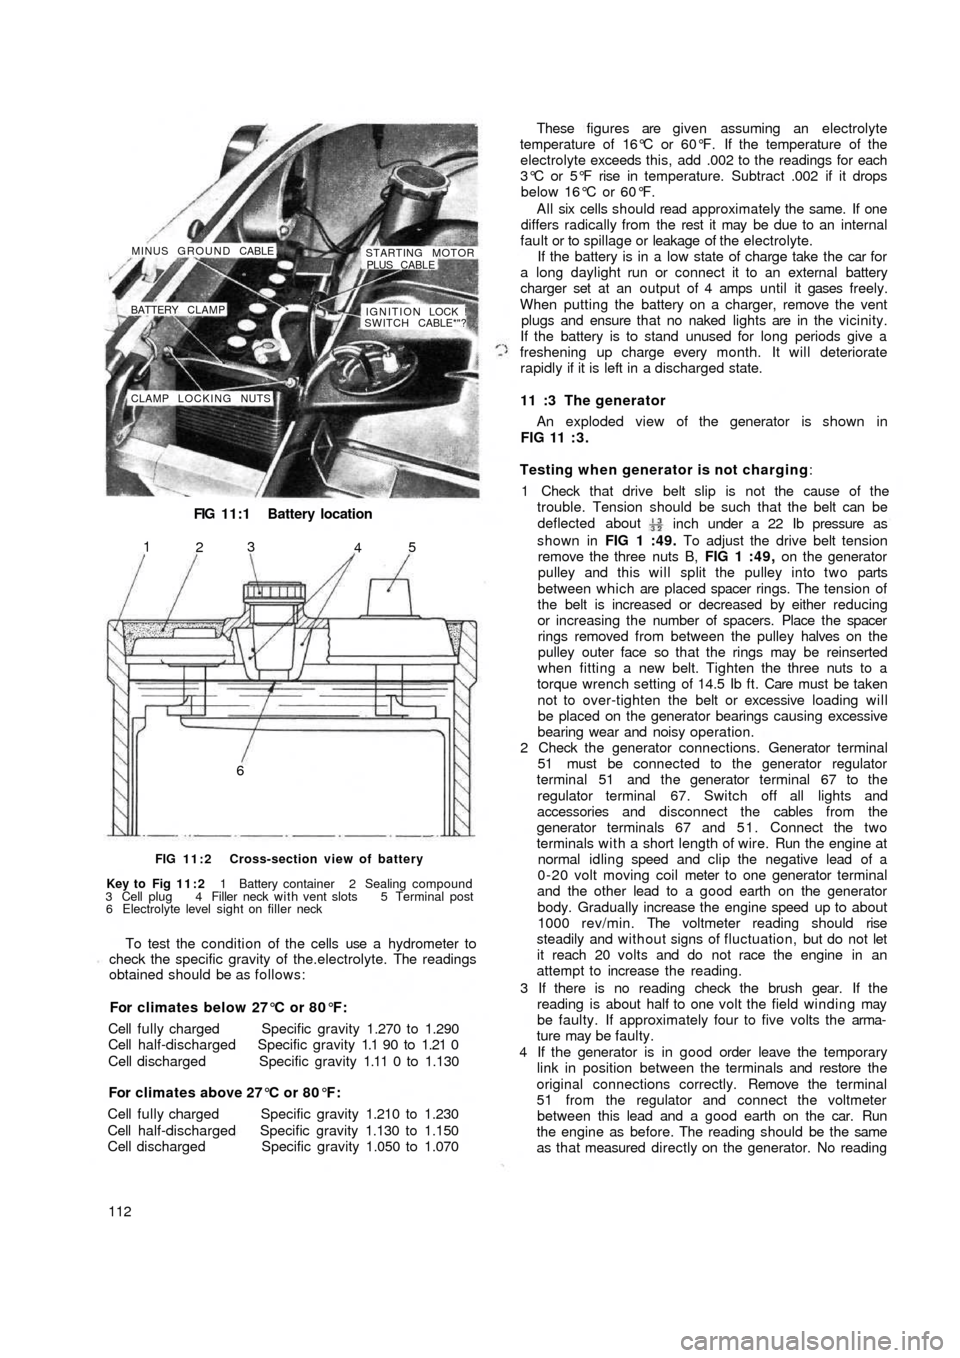 FIAT 500 1965 1.G Workshop Manual FIG 11:1 Battery location
CLAMP LOCKING NUTSIGNITION LOCK !
SWITCH CABLE*"? BATTERY CLAMP MINUS GROUND CABLE
STARTING MOTOR
PLUS CABLE
65
4 3
2 1
FIG 11:2 Cross-section view of battery
Key to  Fig  11